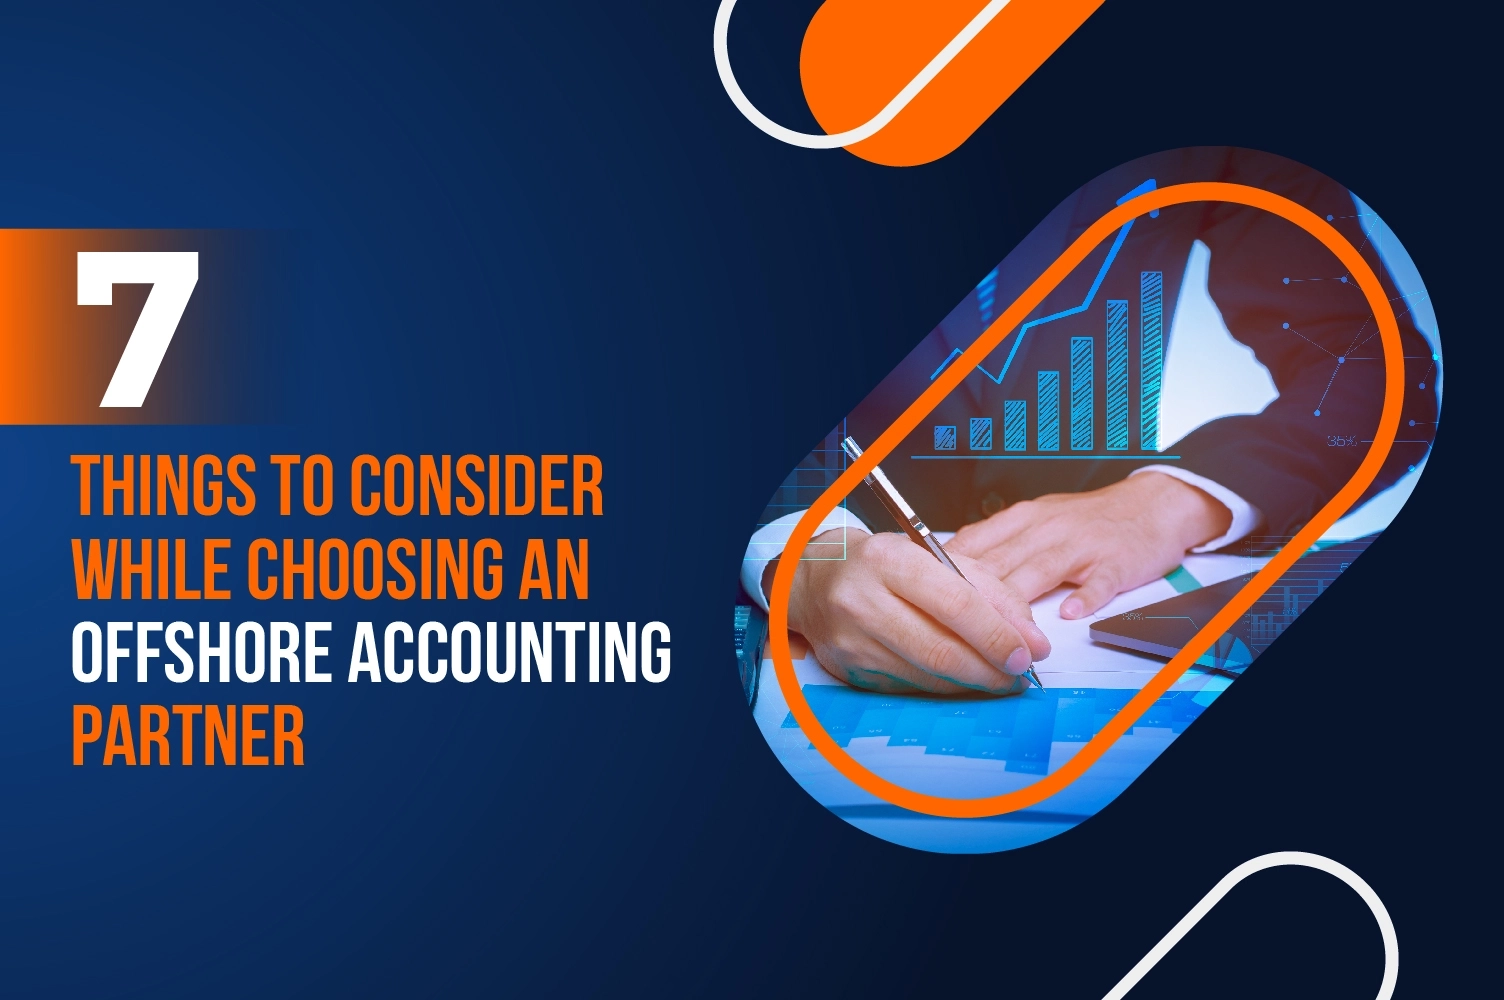 HOW TO ASSESS AND SELECT THE PERFECT ACCOUNTING OFFSHORING PARTNER